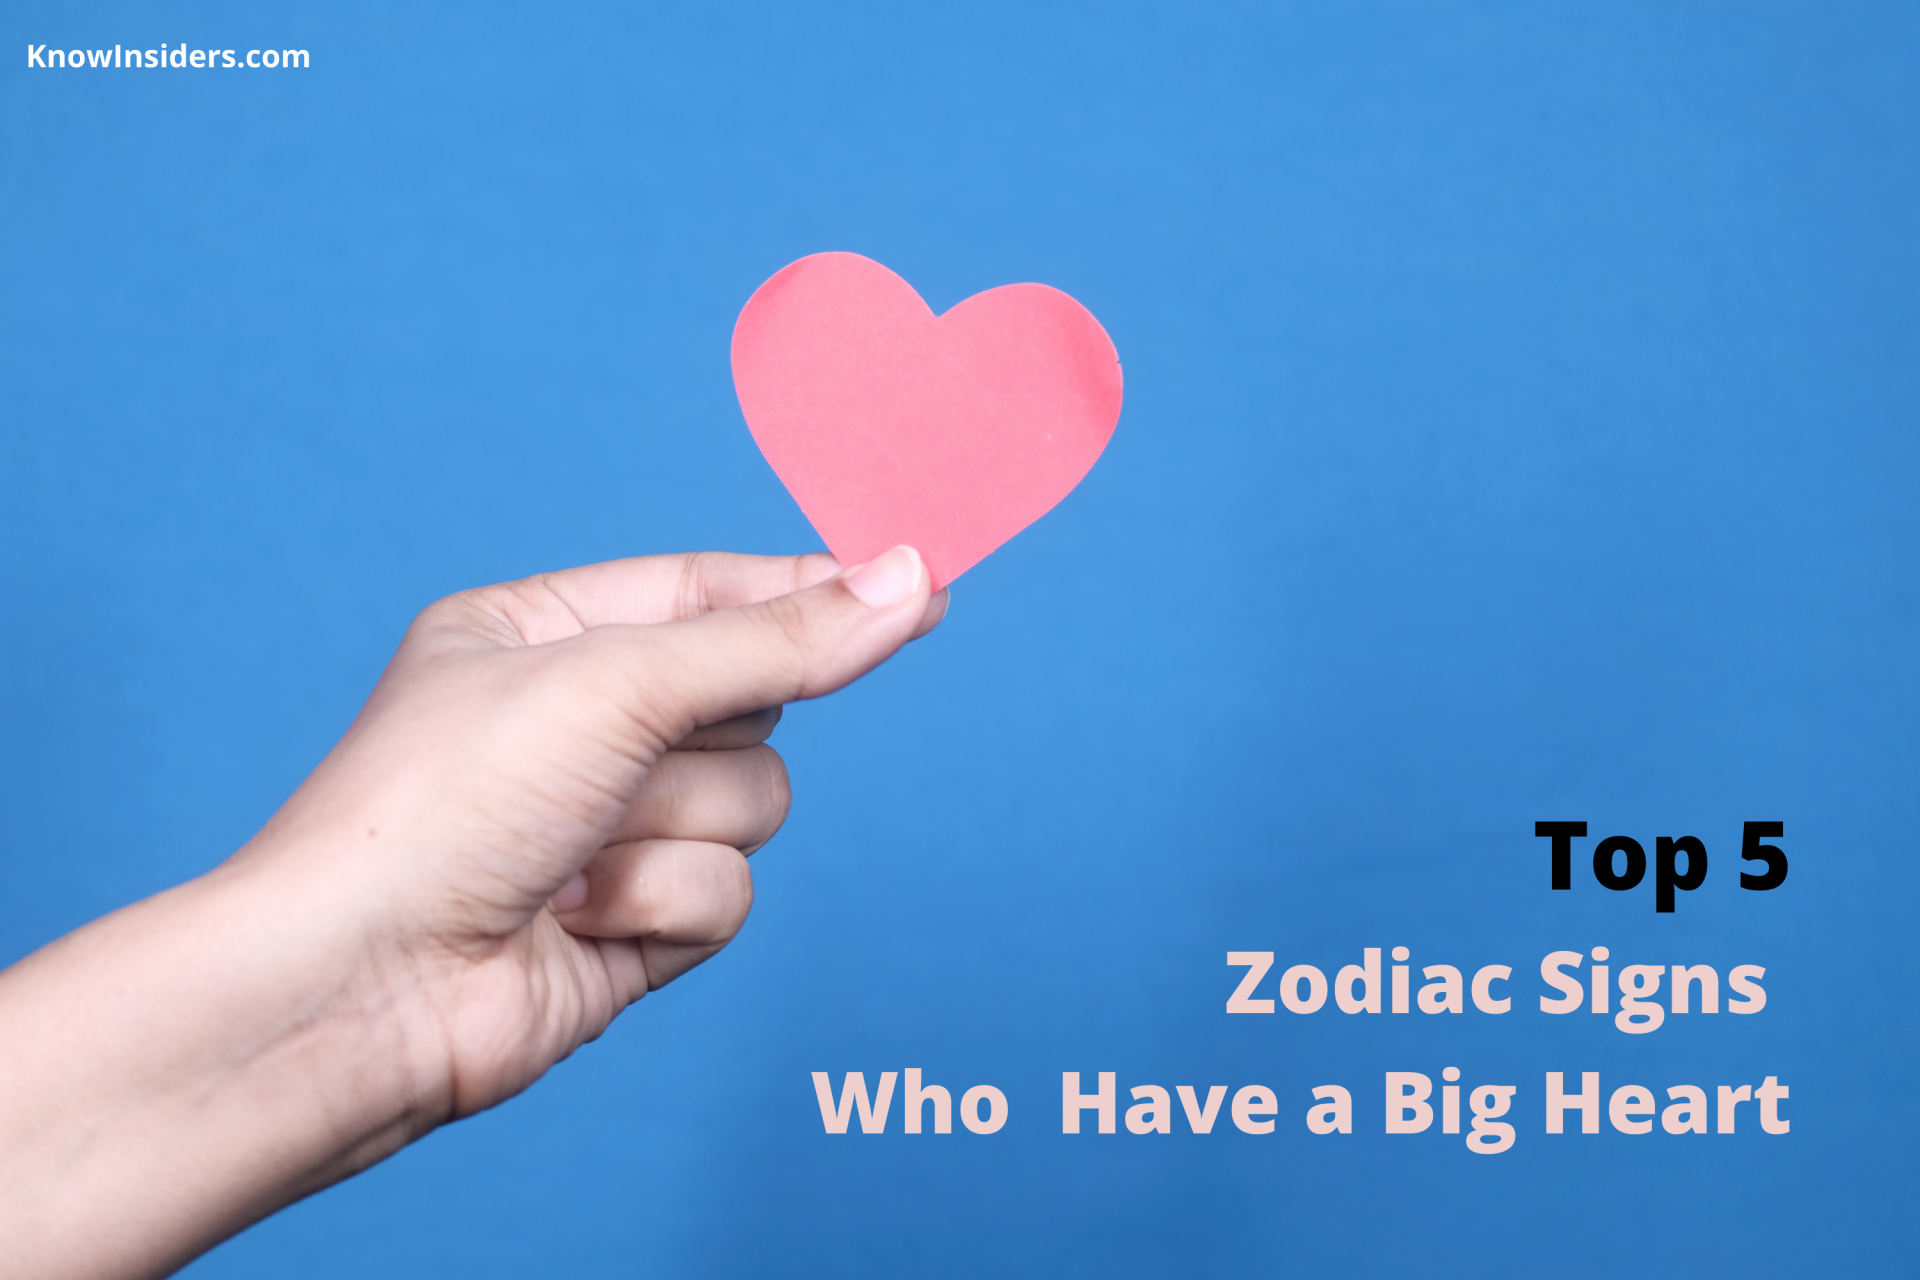 Top 5 Zodiac Signs Who Have a Big Heart